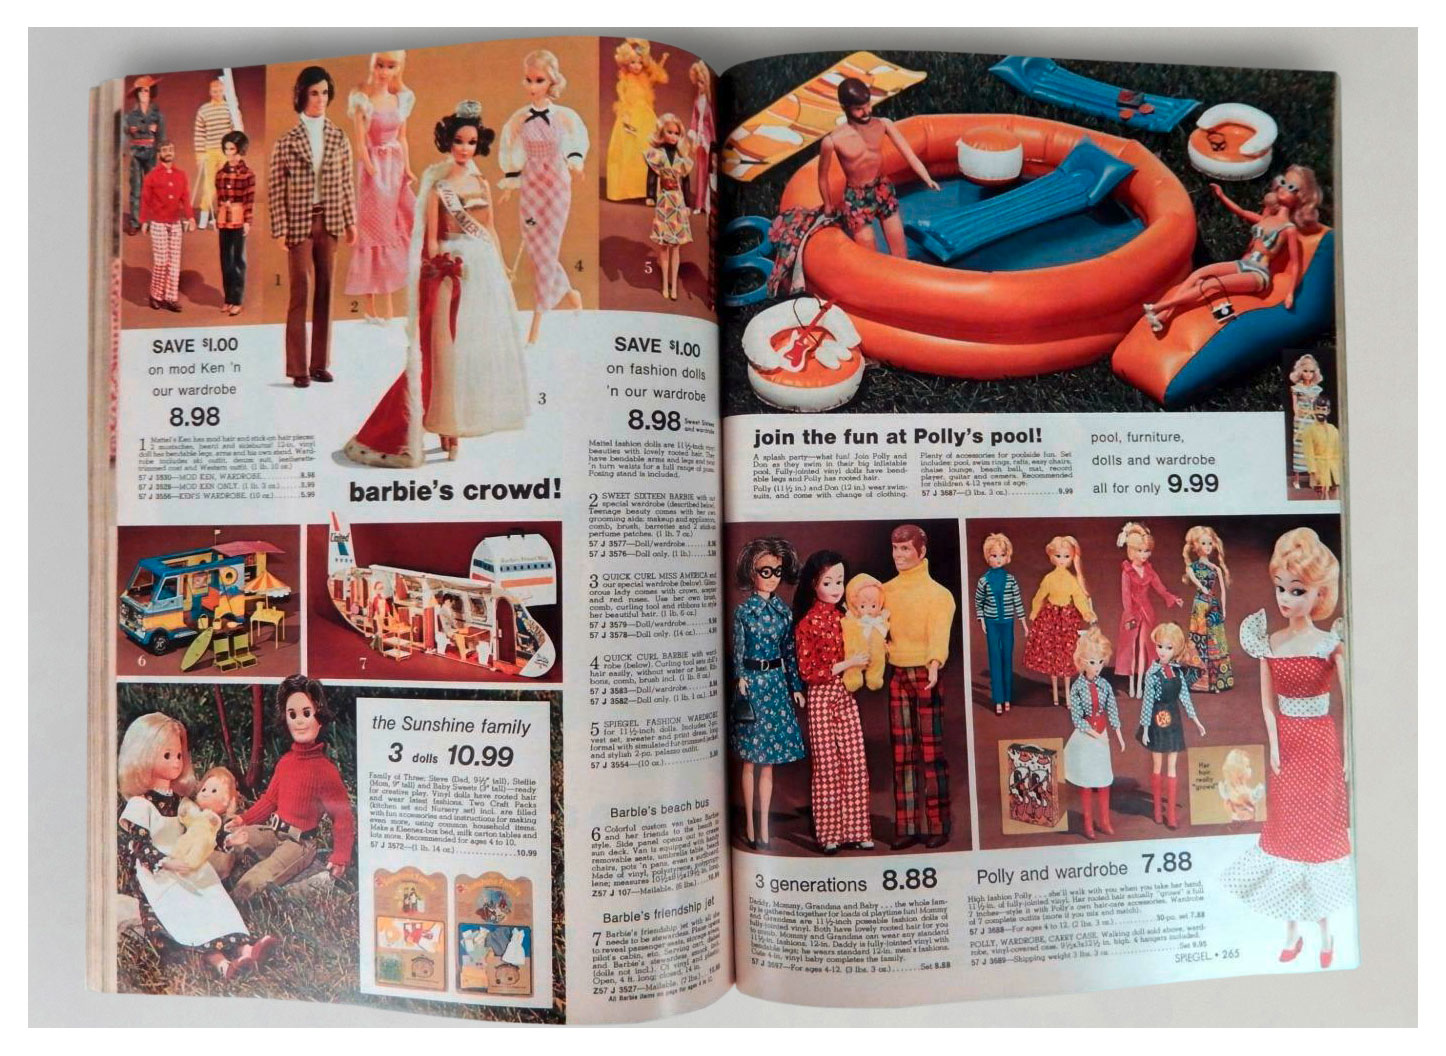 From 1974 Spiegel Christmas catalogue